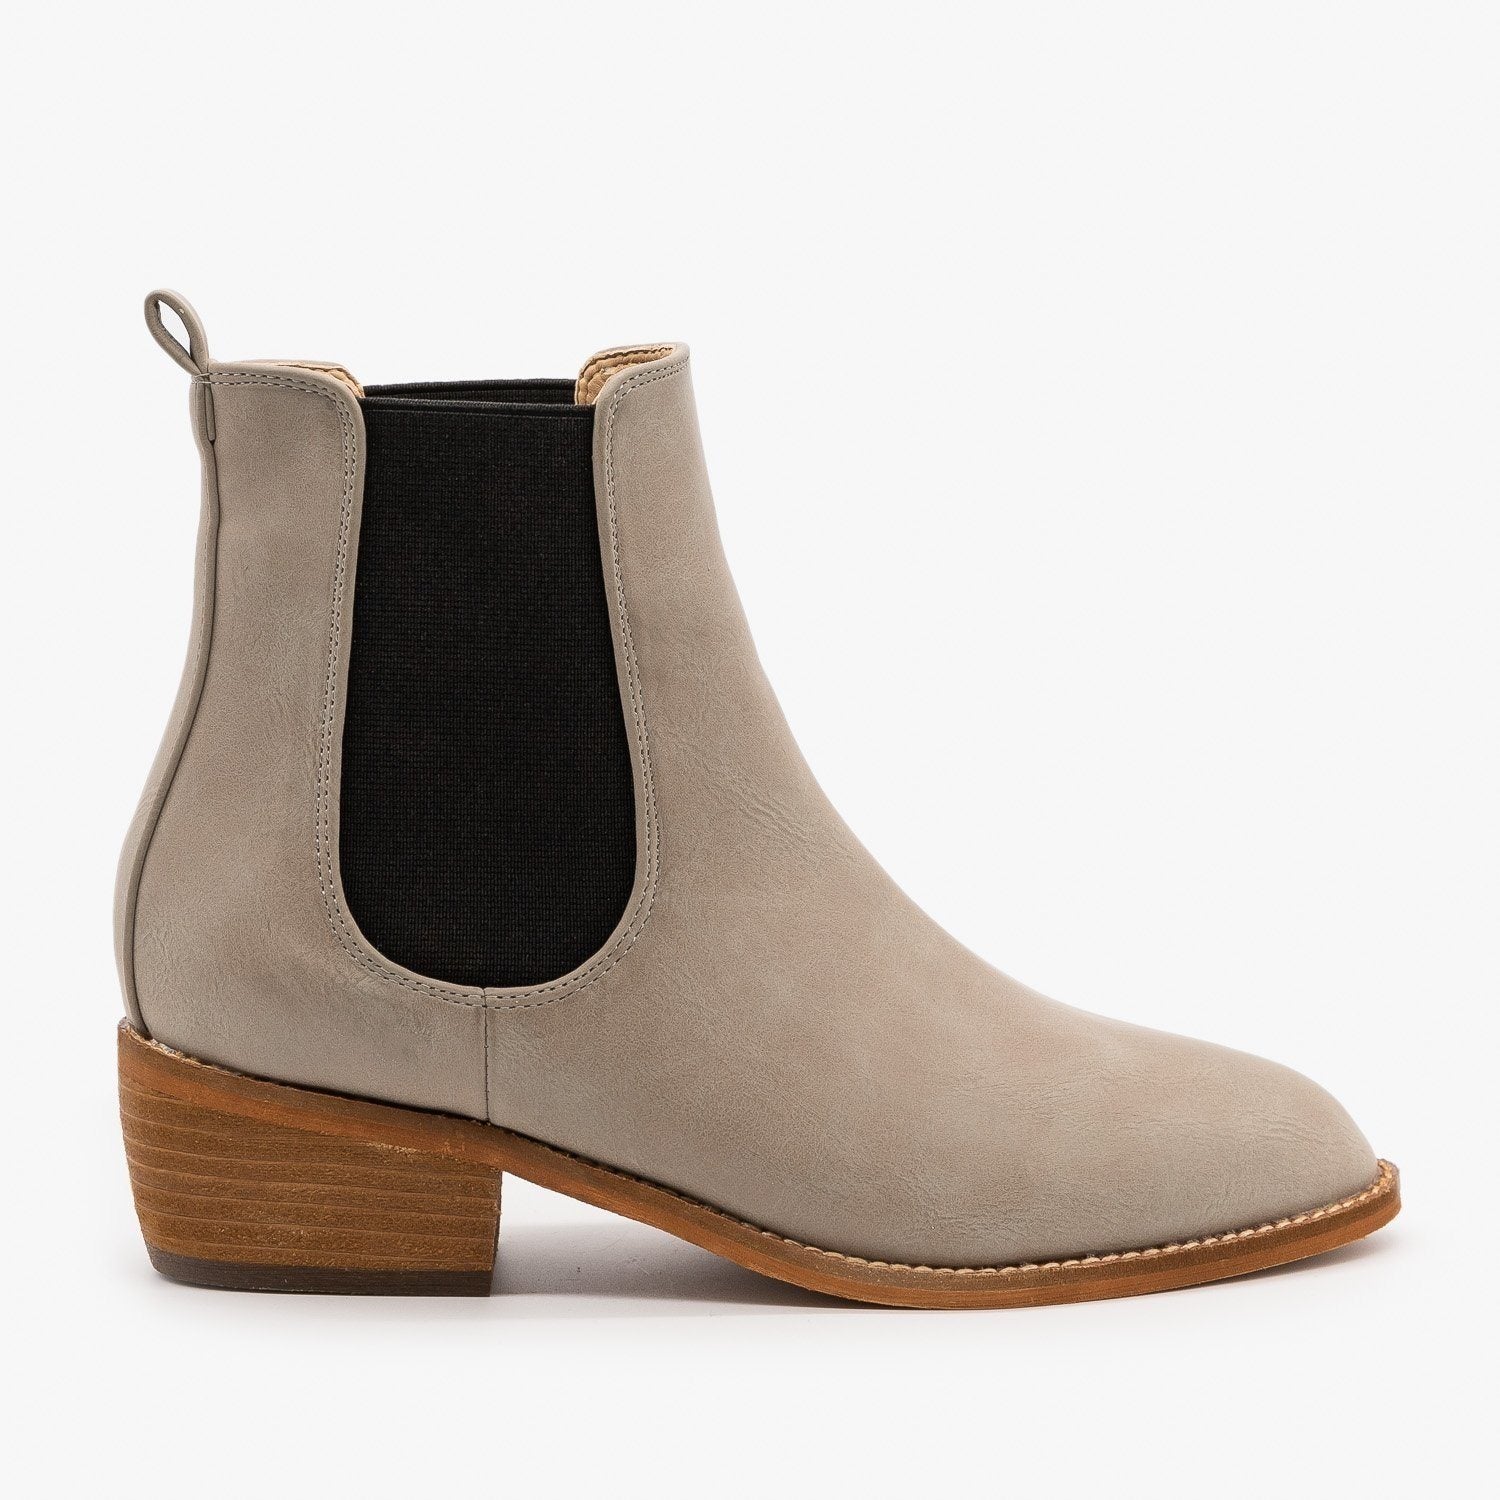 Ankle Booties - ARider Girl Shoes Chase 